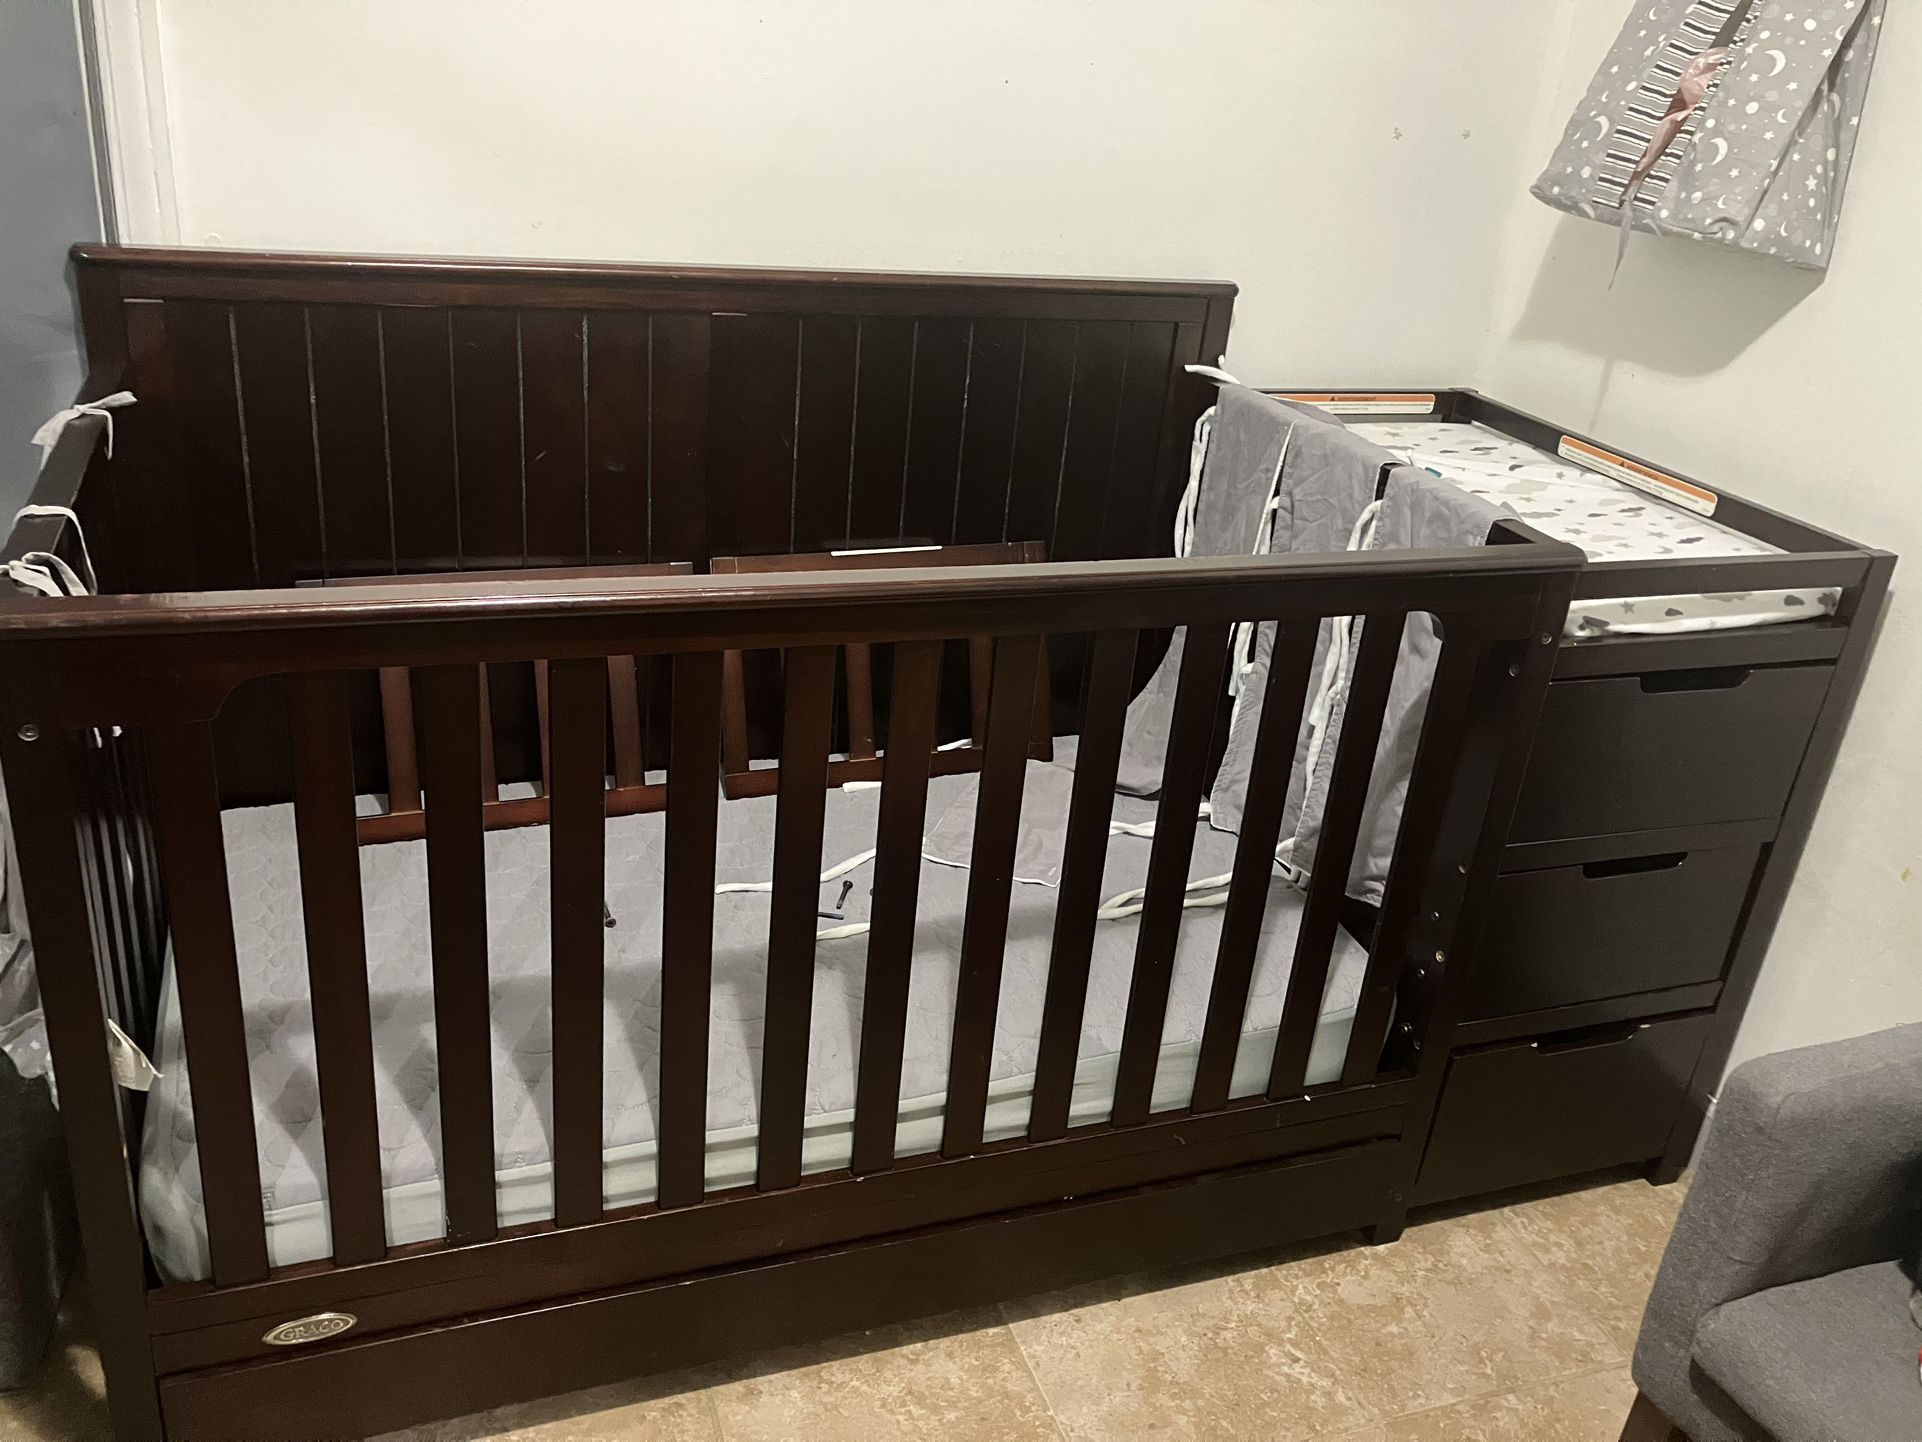 Graco Hadley 5-in-1 Convertible Crib with Drawer (Espresso ) Crib Mattress, 2 Toddler Bed Guard Rails, 3 Bed Rail Covers 